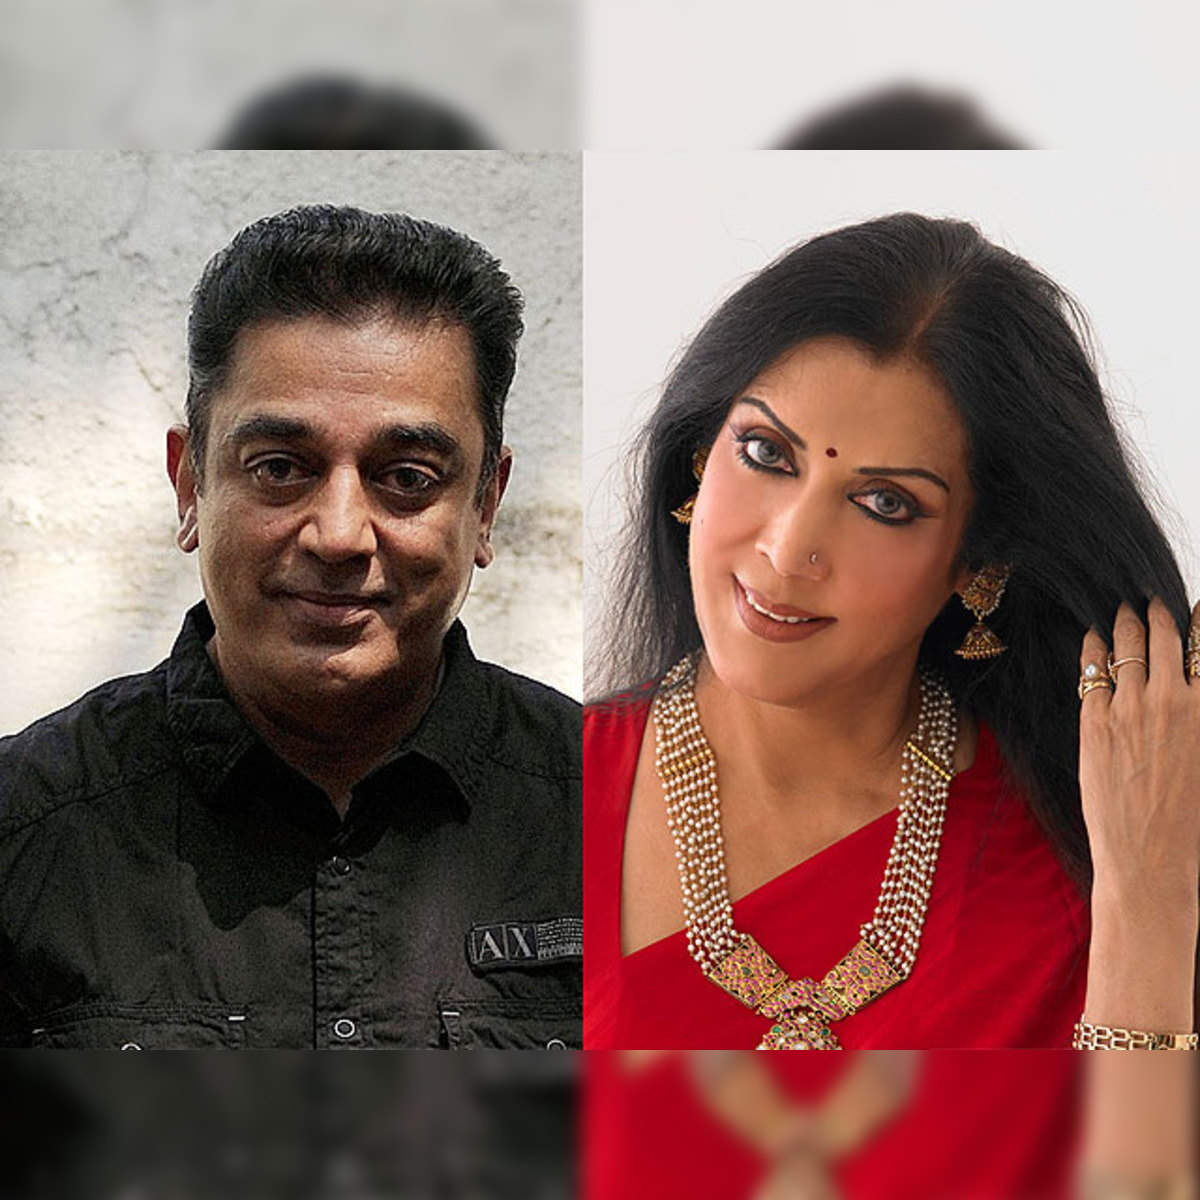 Kamal was trying to get sympathy of his daughter says ex-wife